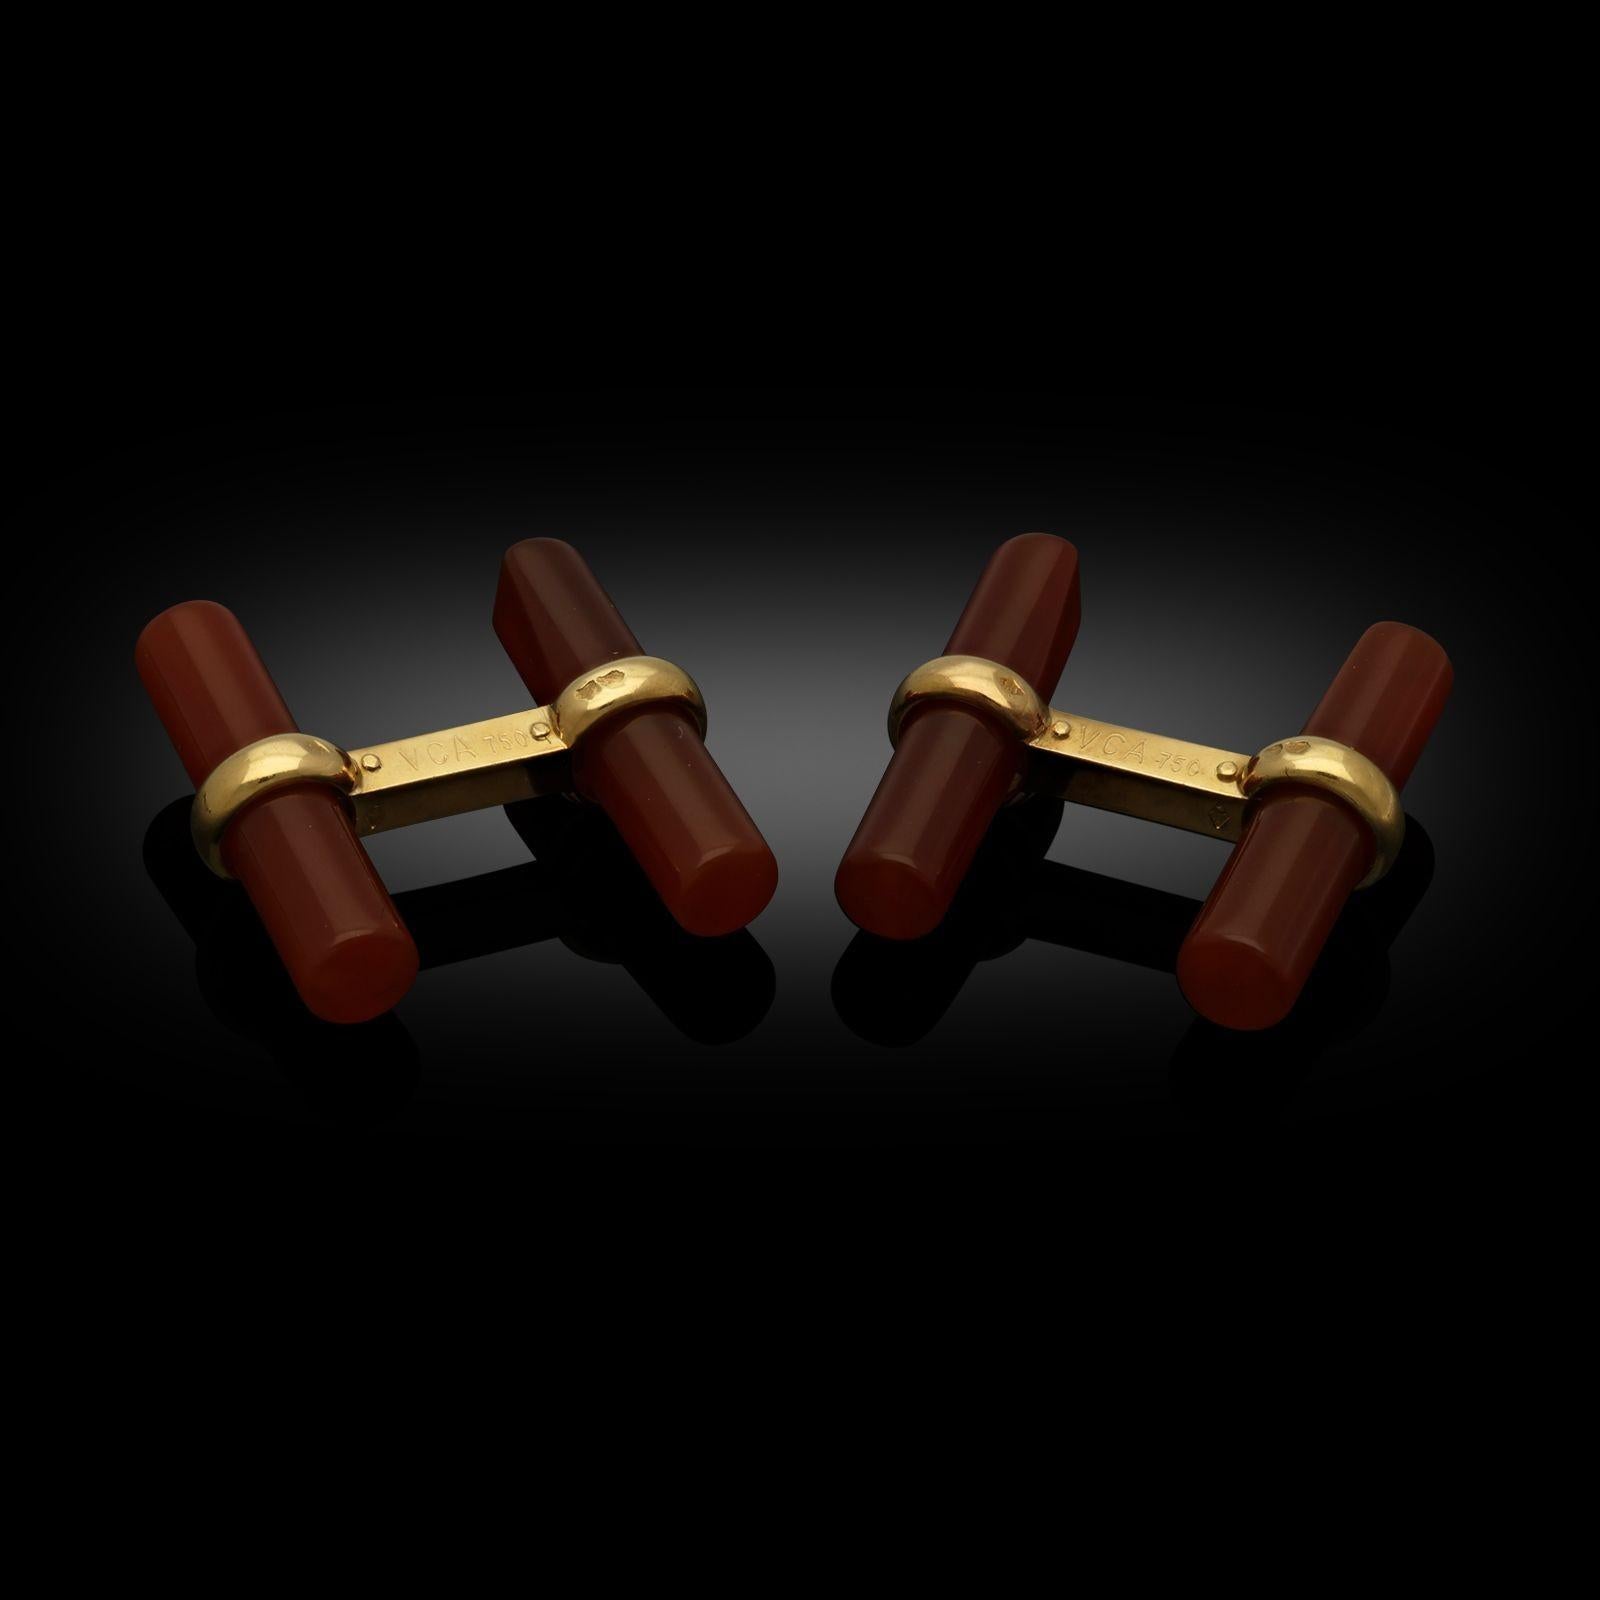 A stylish pair of gold and hardstone vintage cufflinks by Van Cleef & Arpels c.1972, the double ended cufflinks formed of two cylindrical bars in 18ct yellow gold with fluted edges linked by a solid bar to create an overall H shape, the gold bar